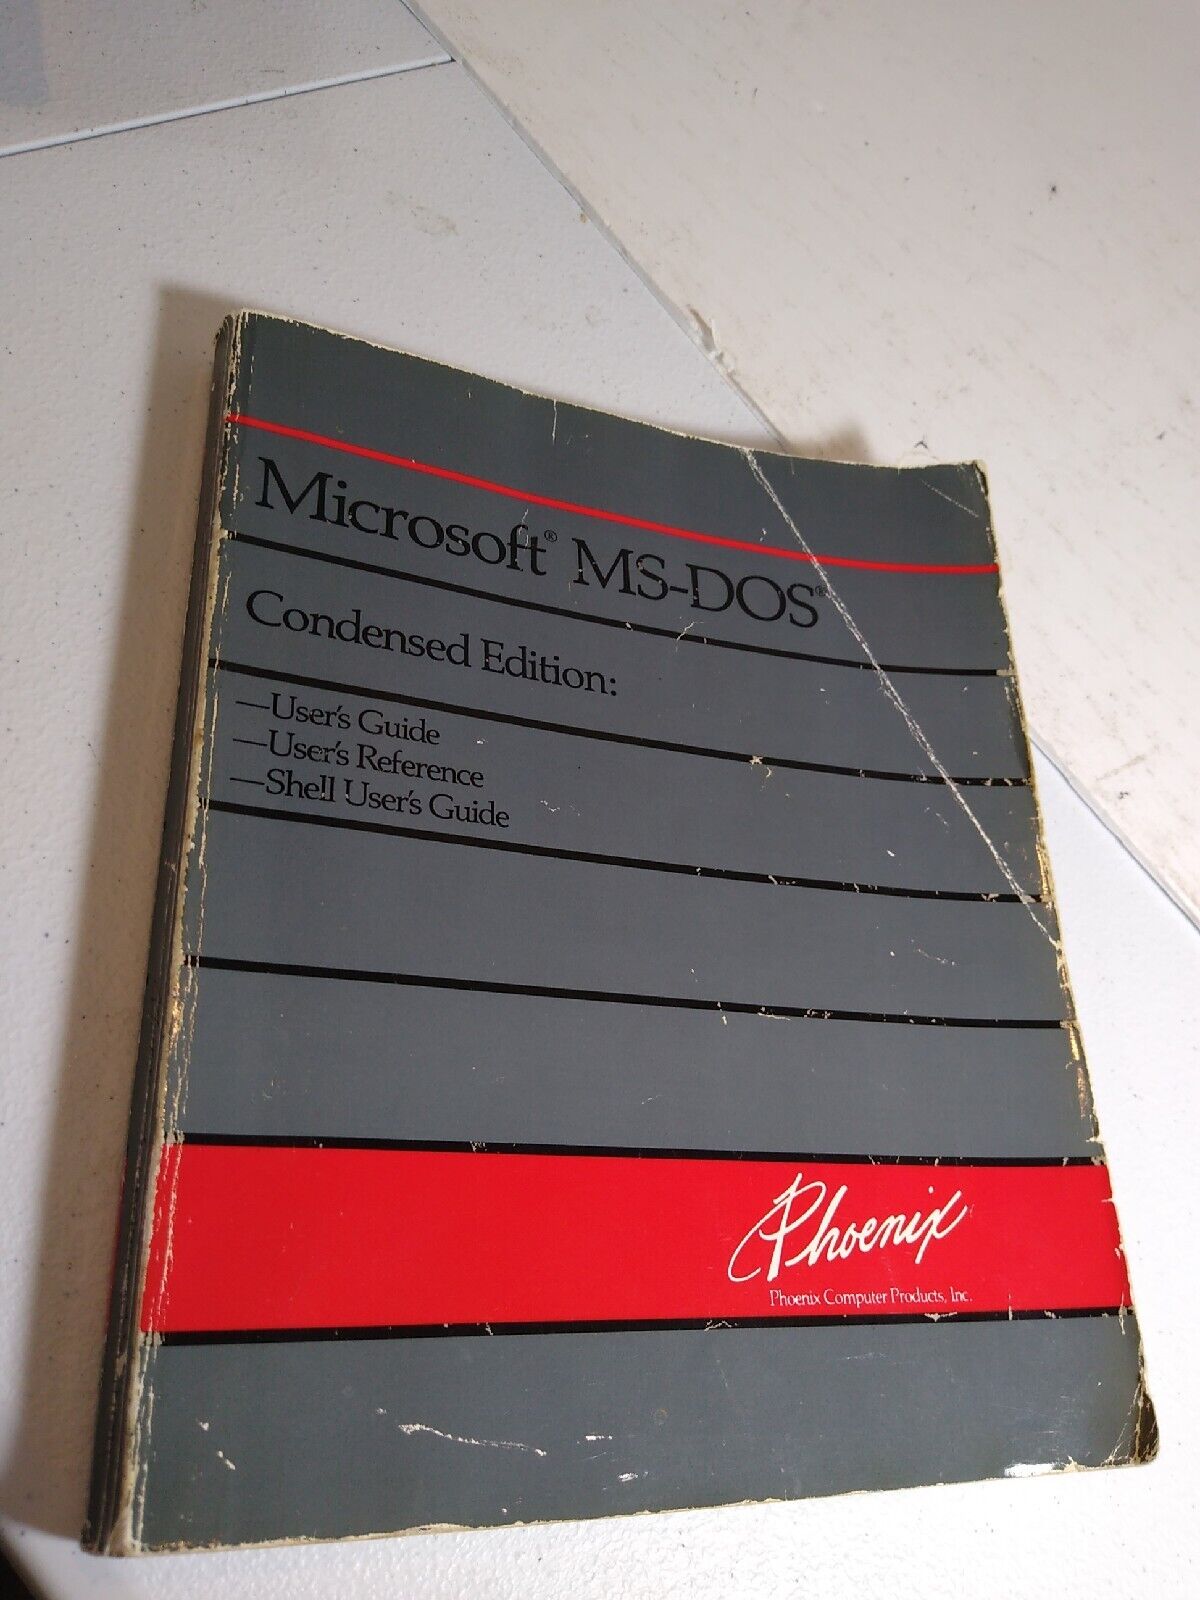 Phoenix Microsoft MS-DOS  Condensed Edition Users Guide.